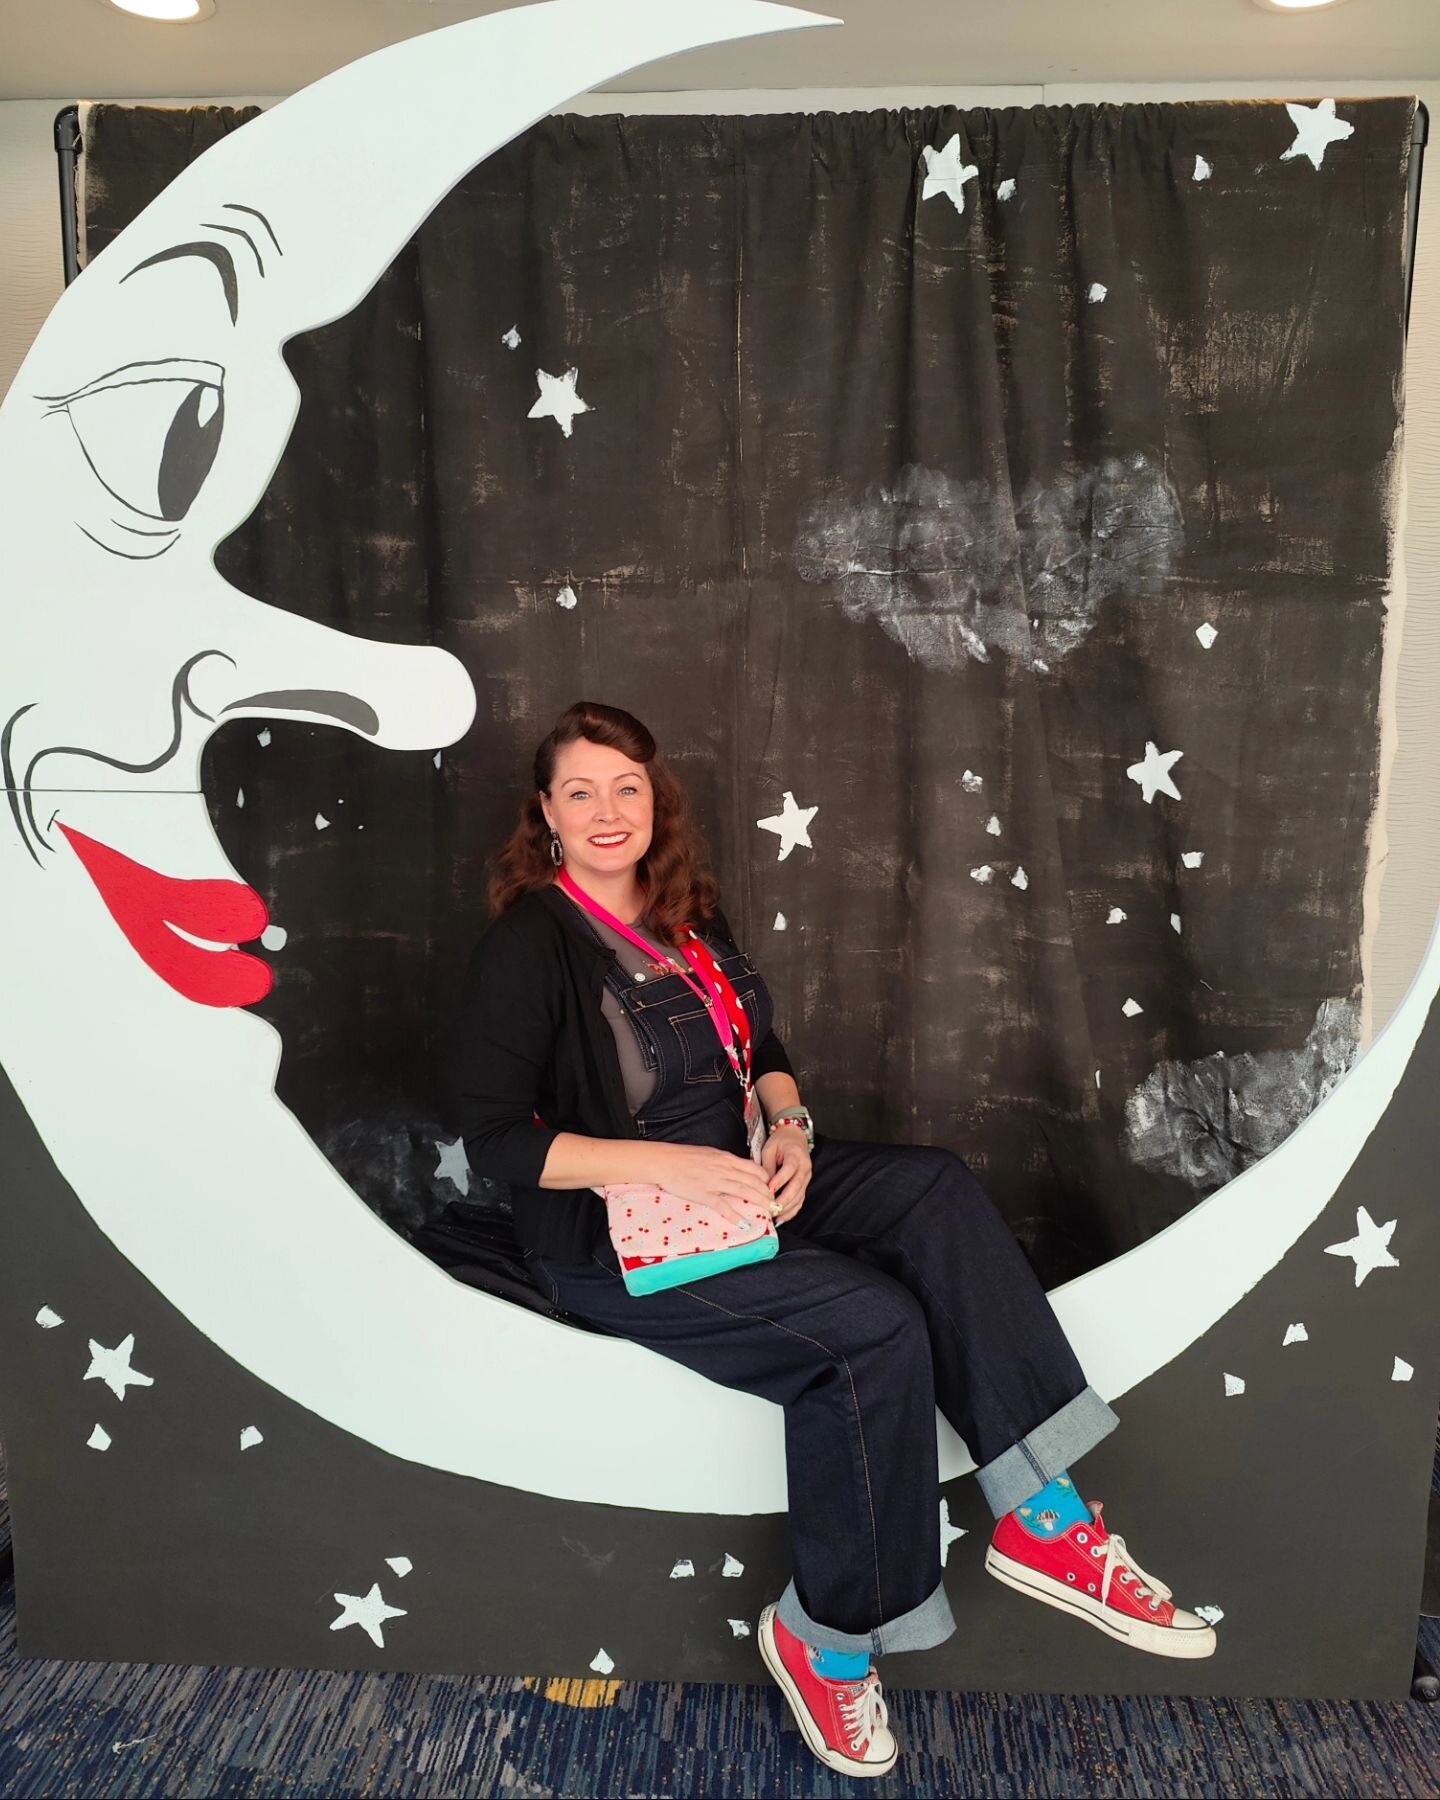 Never have I ever... Wanted to take a backdrop home with me so badly. 😆🌛

Do you think I could fit this in my car? 🤪 

I'm having the best time at Craftcation, of course. 

🌛 🌛 🌛

@dearhandmadelife
#dearhandmadelife
#craftythings
#foundmytribe 